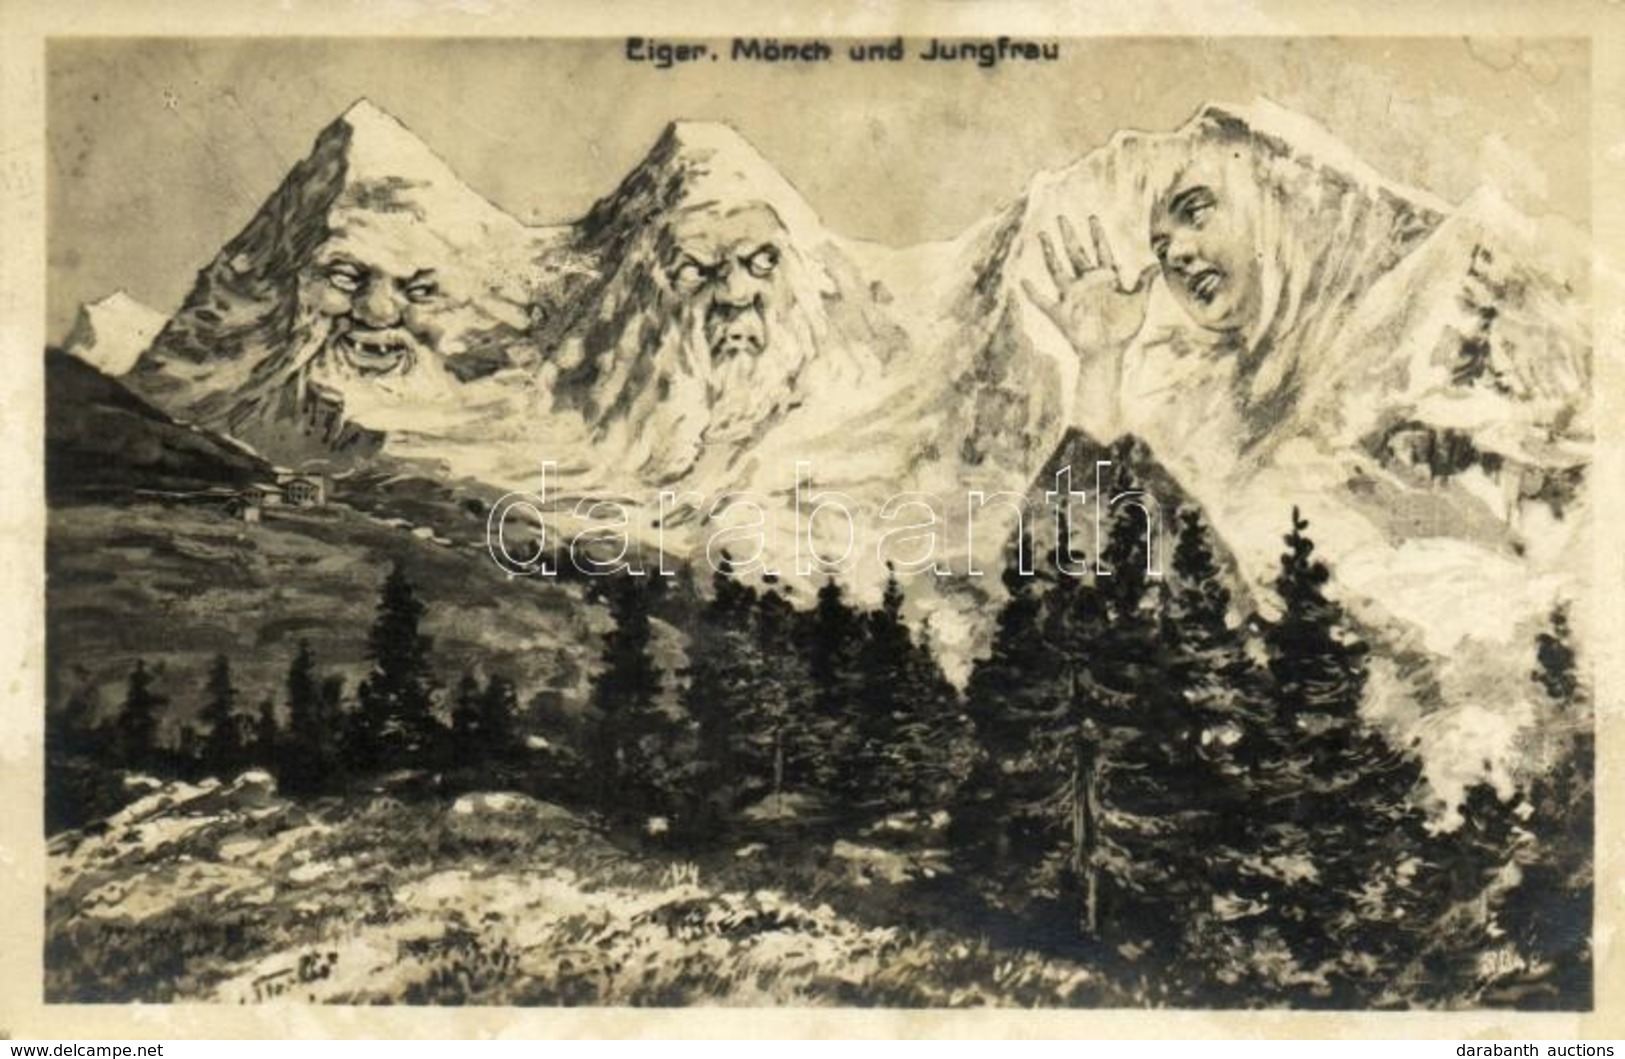 T1/T2 1929 Eiger, Mönch Und Jungfrau / Mountains With Faces, Edition Art. Perrochet-Matile - Unclassified